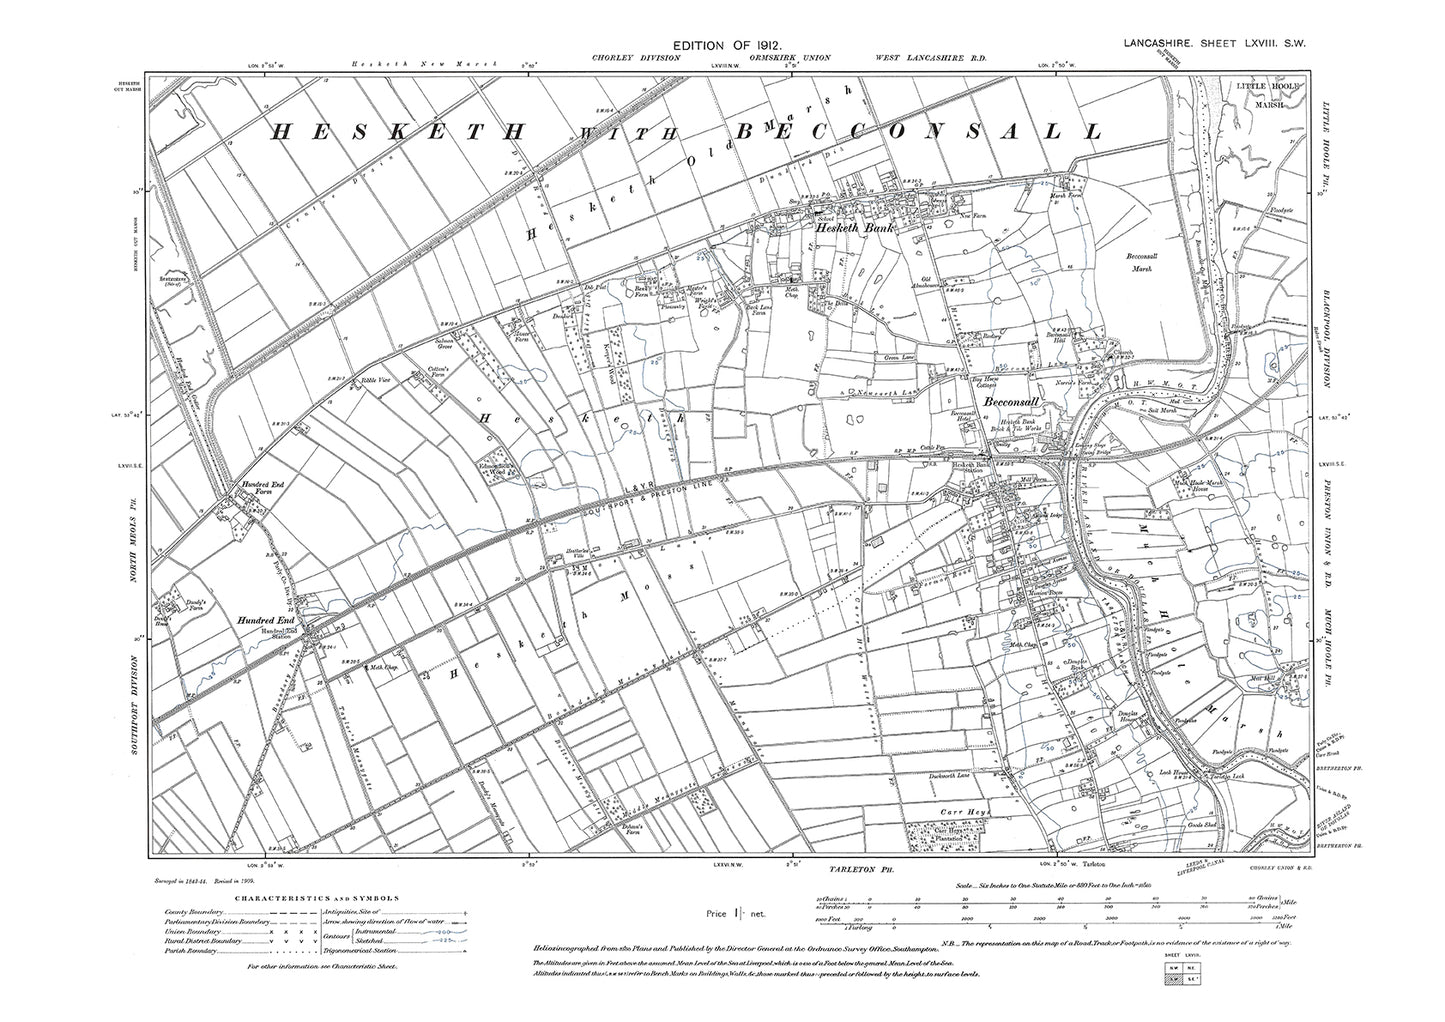 Becconsall, Hesketh Bank - Lancashire in 1912 : 68SW